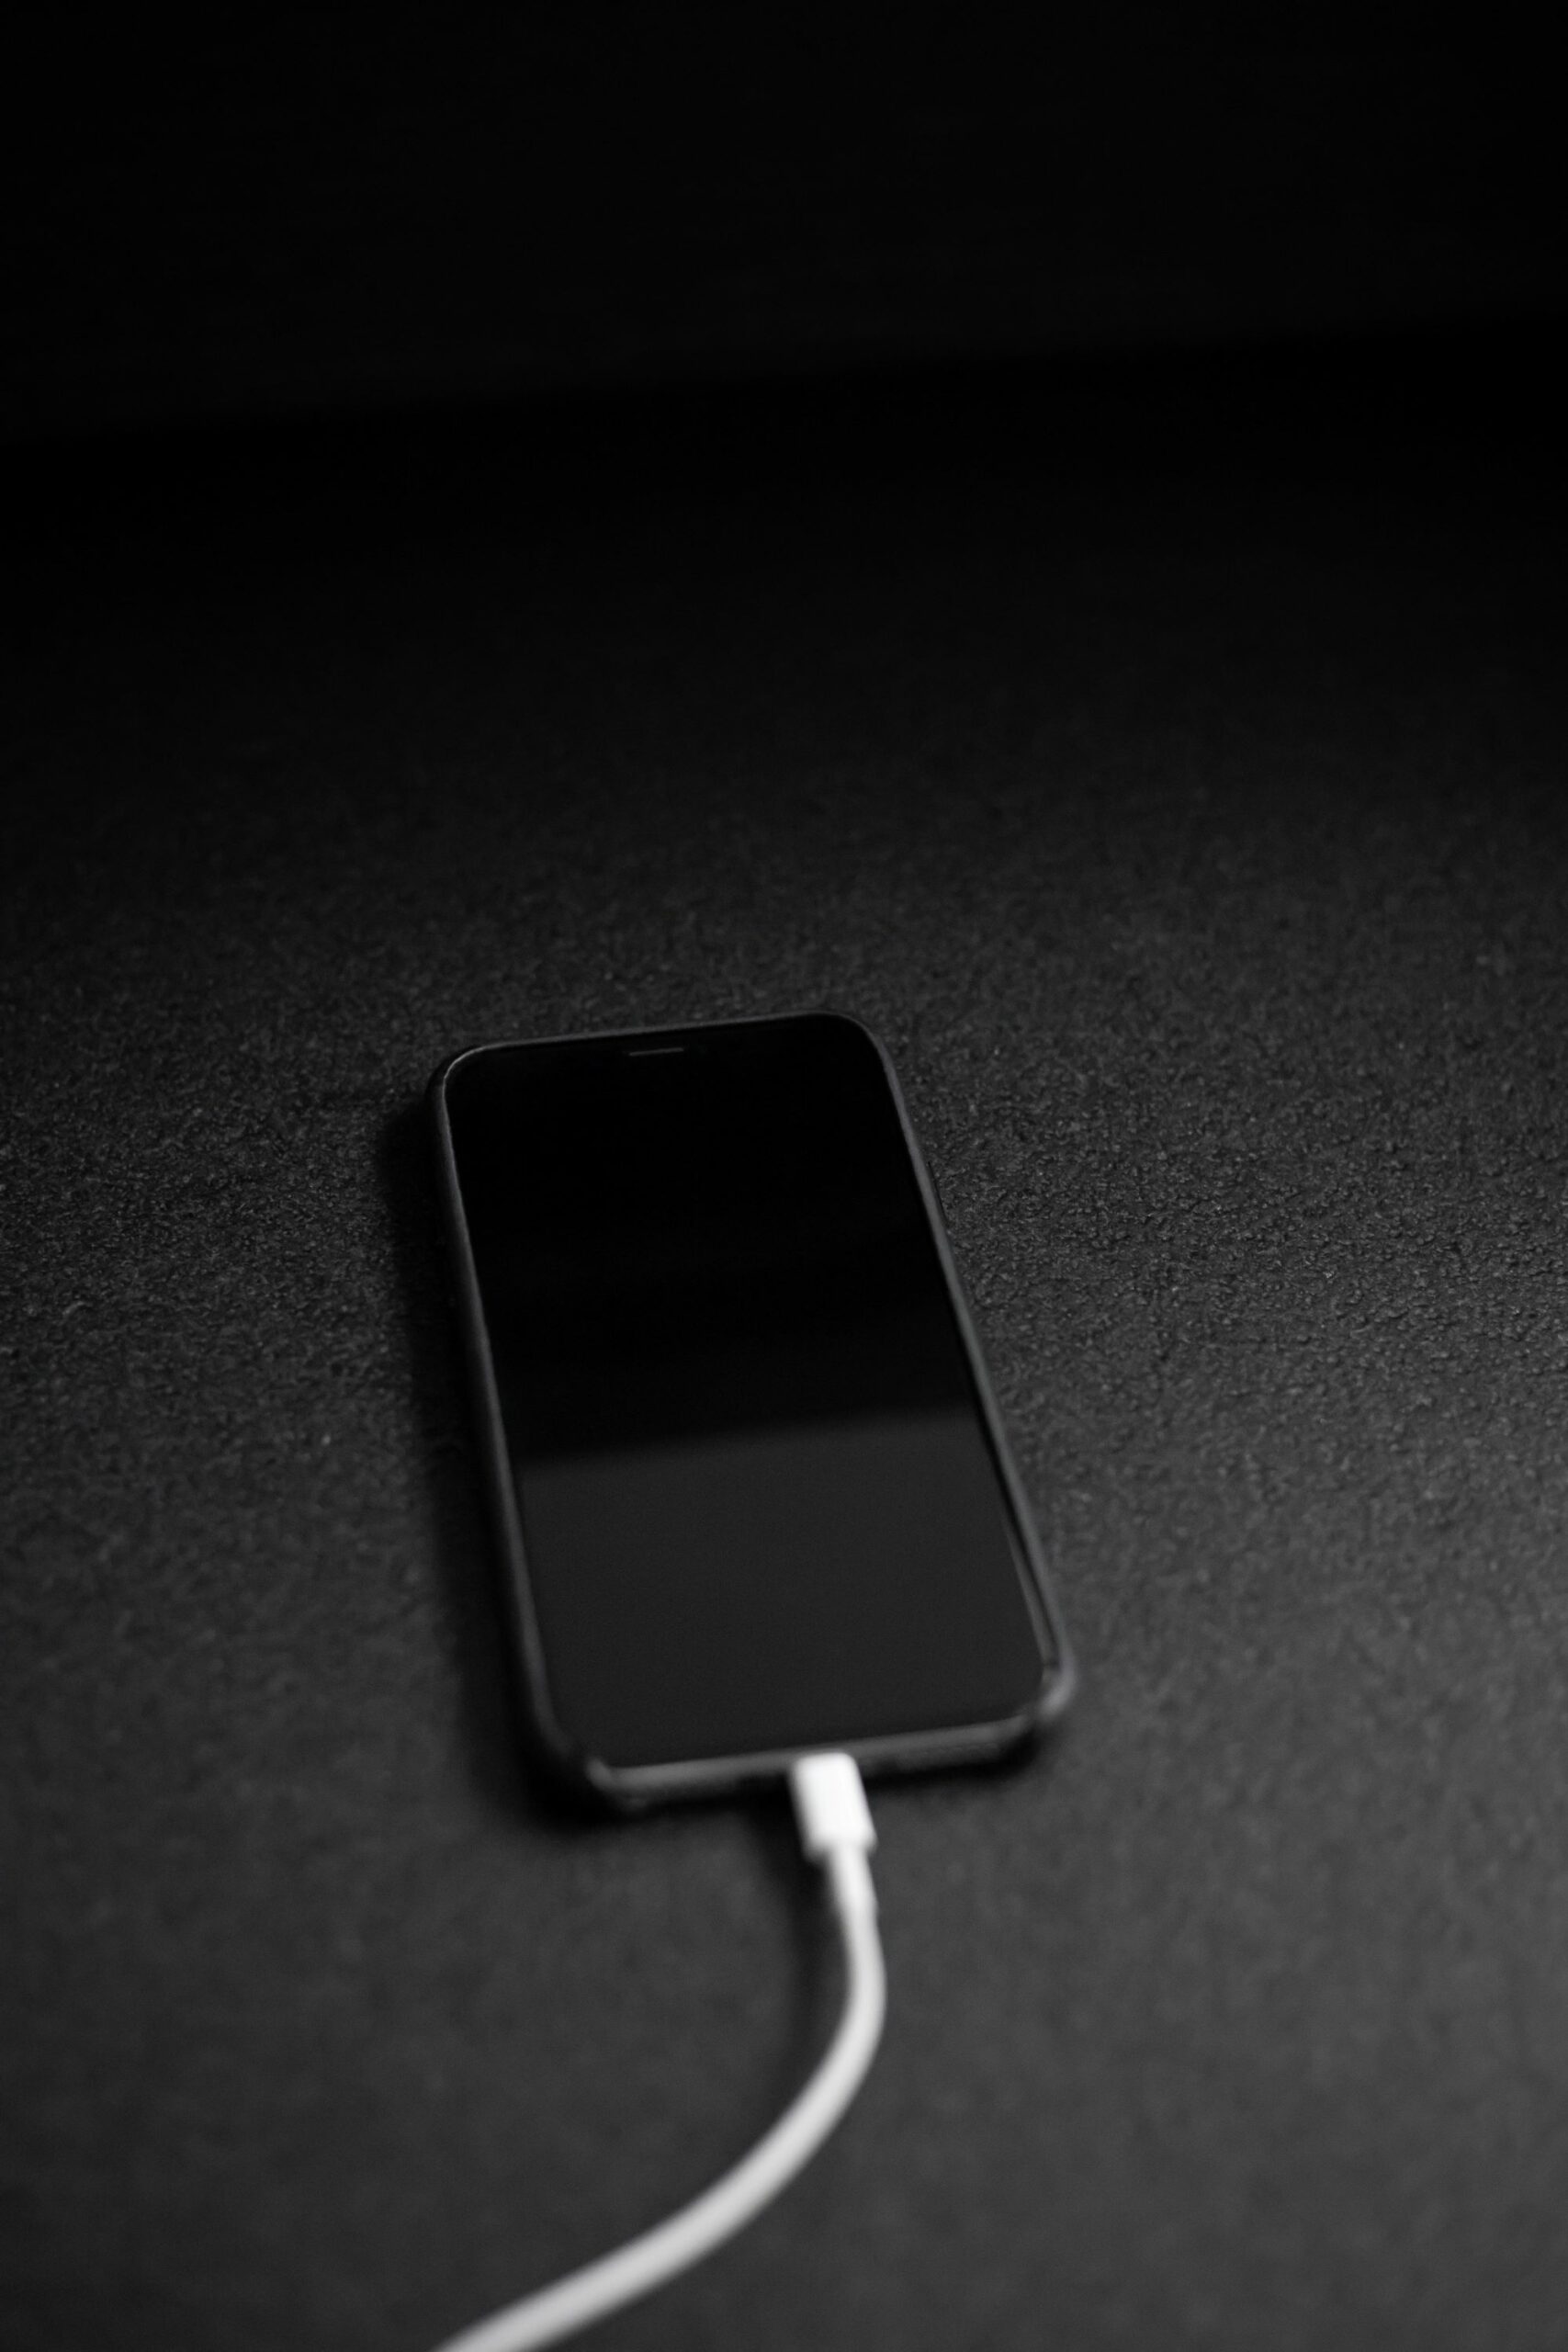 An image of a phone charging.